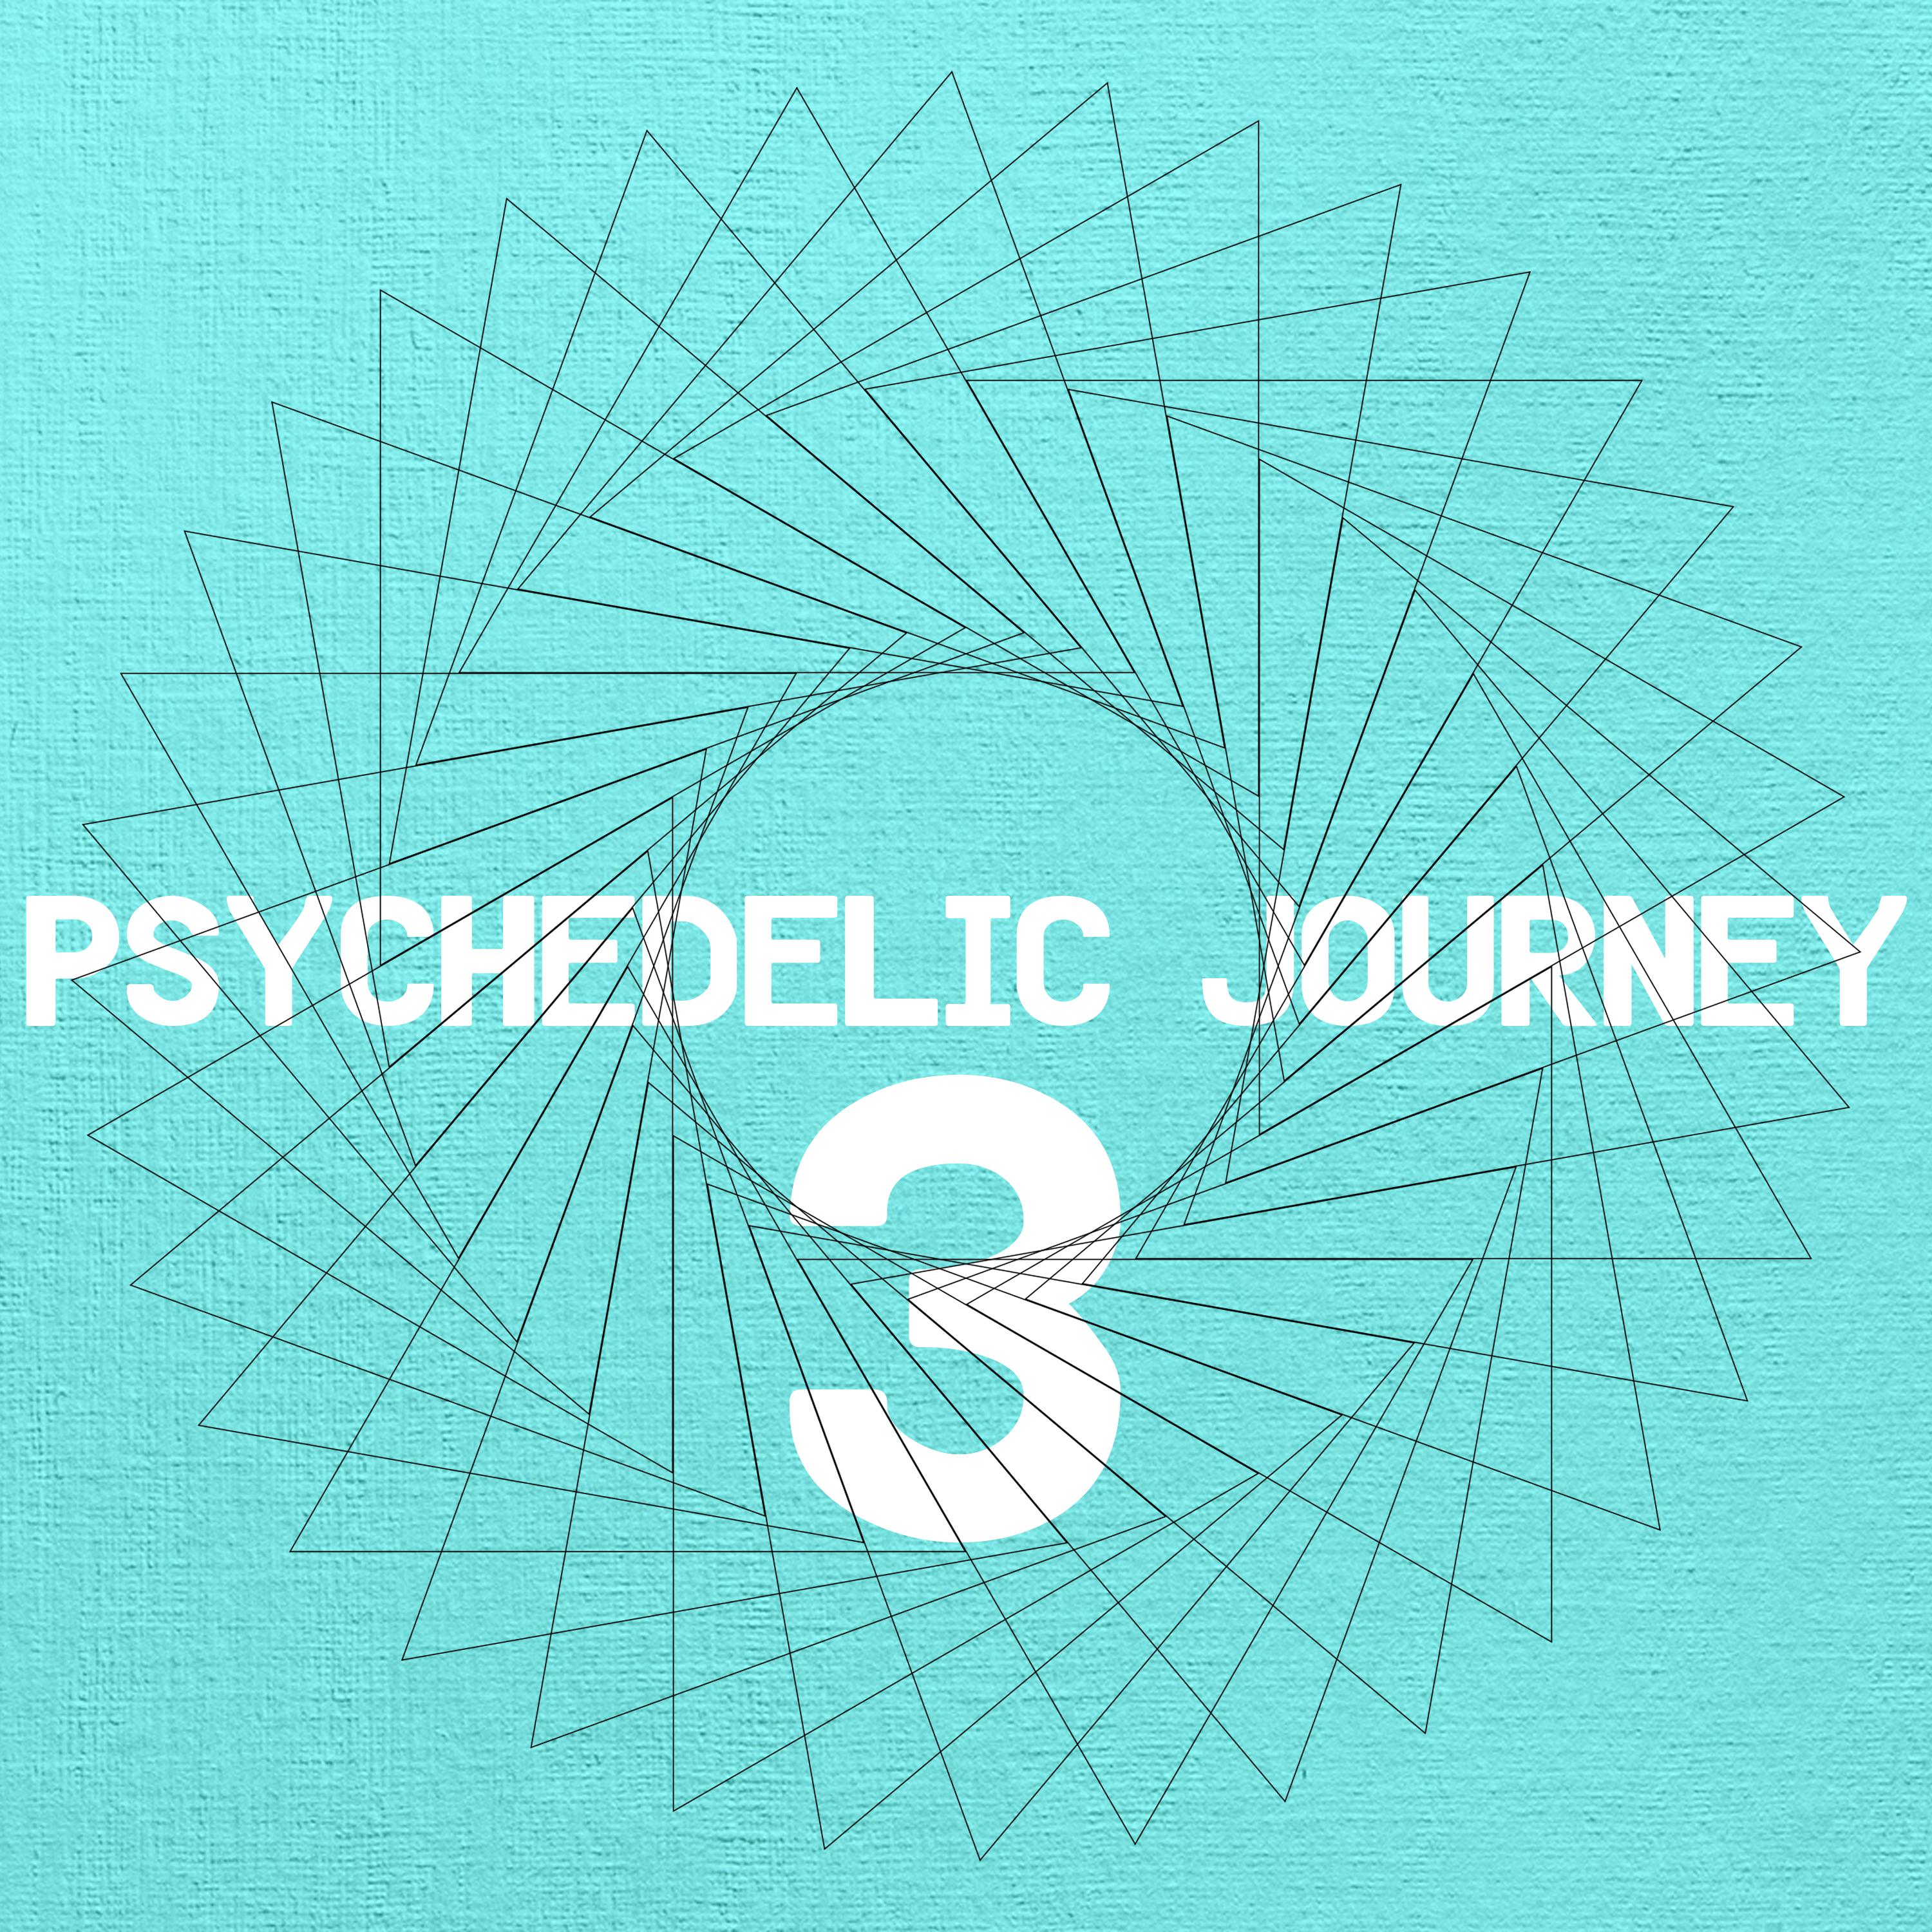 Psychedelic Journey 3